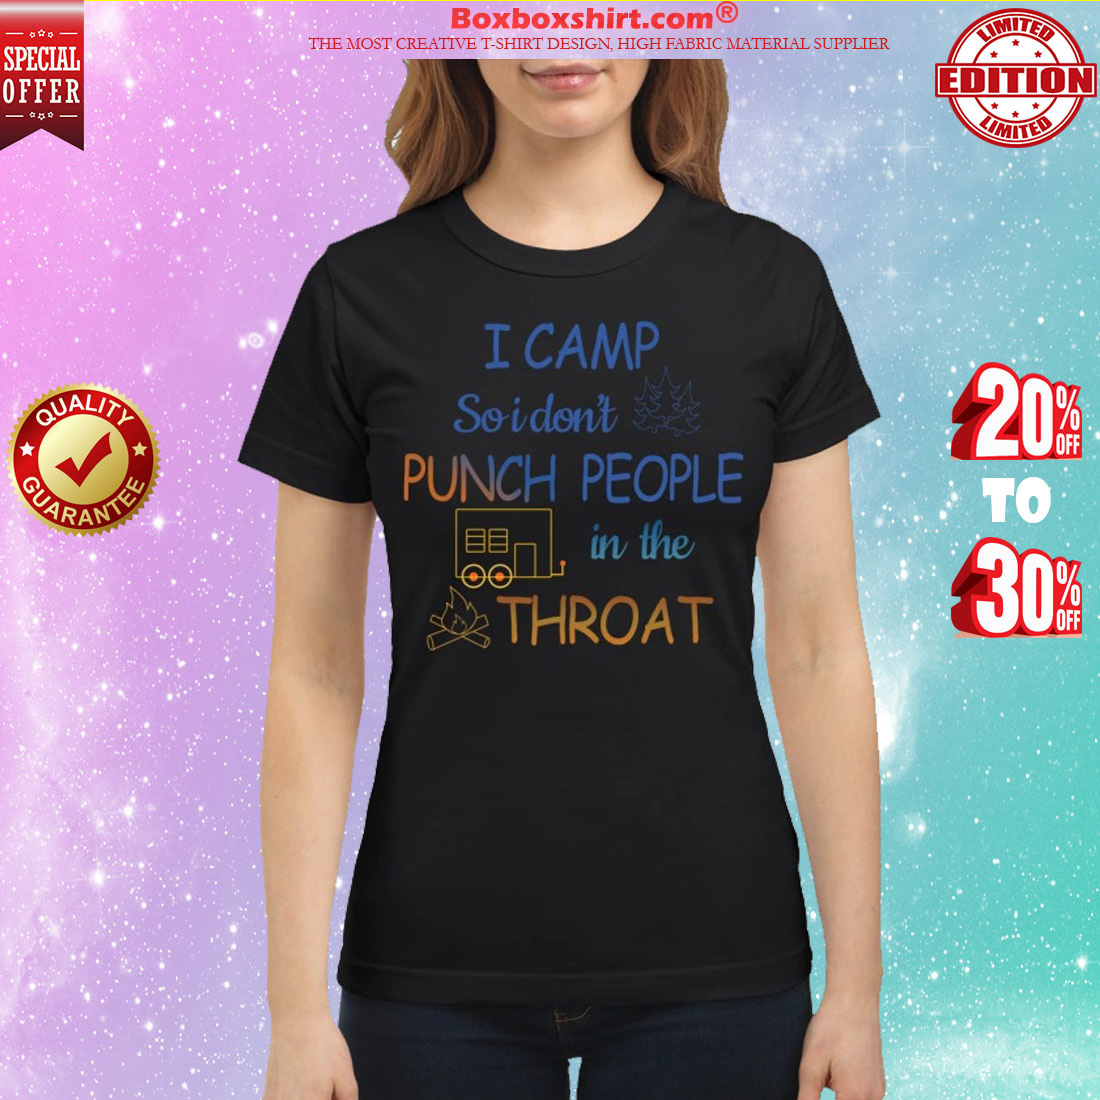 I camp so i don't punch people in the throat classic shirt